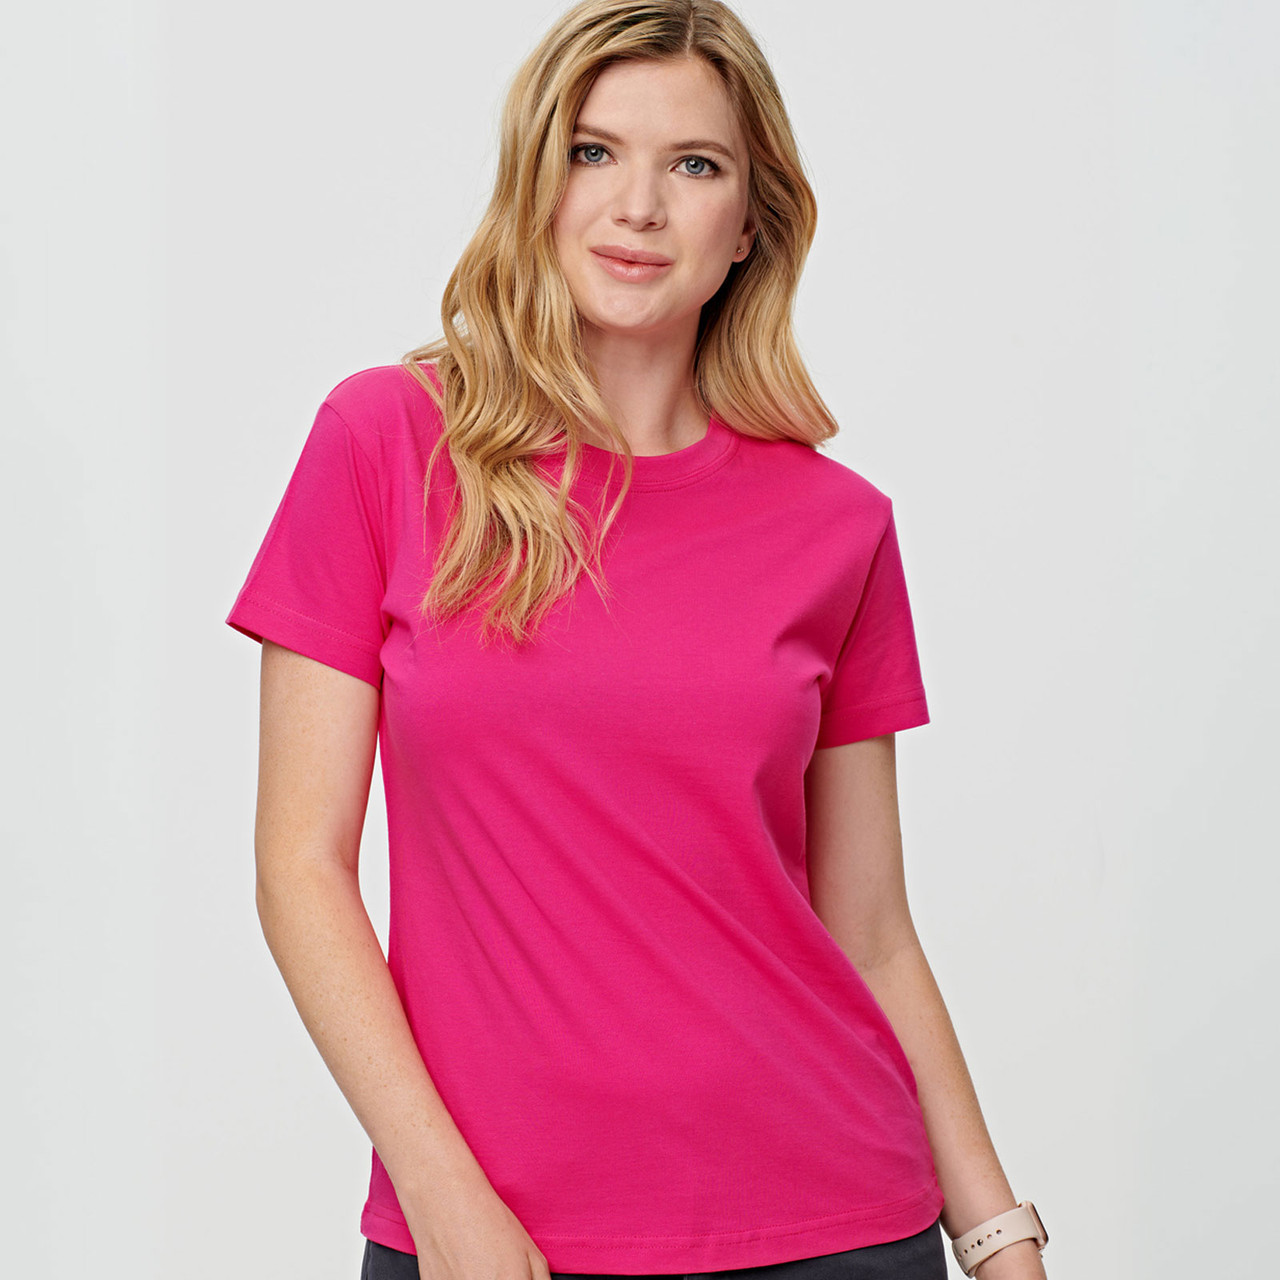 Shop 100% Cotton Semi Fitted Ladies Plain Tshirts | Blank Clothing Online